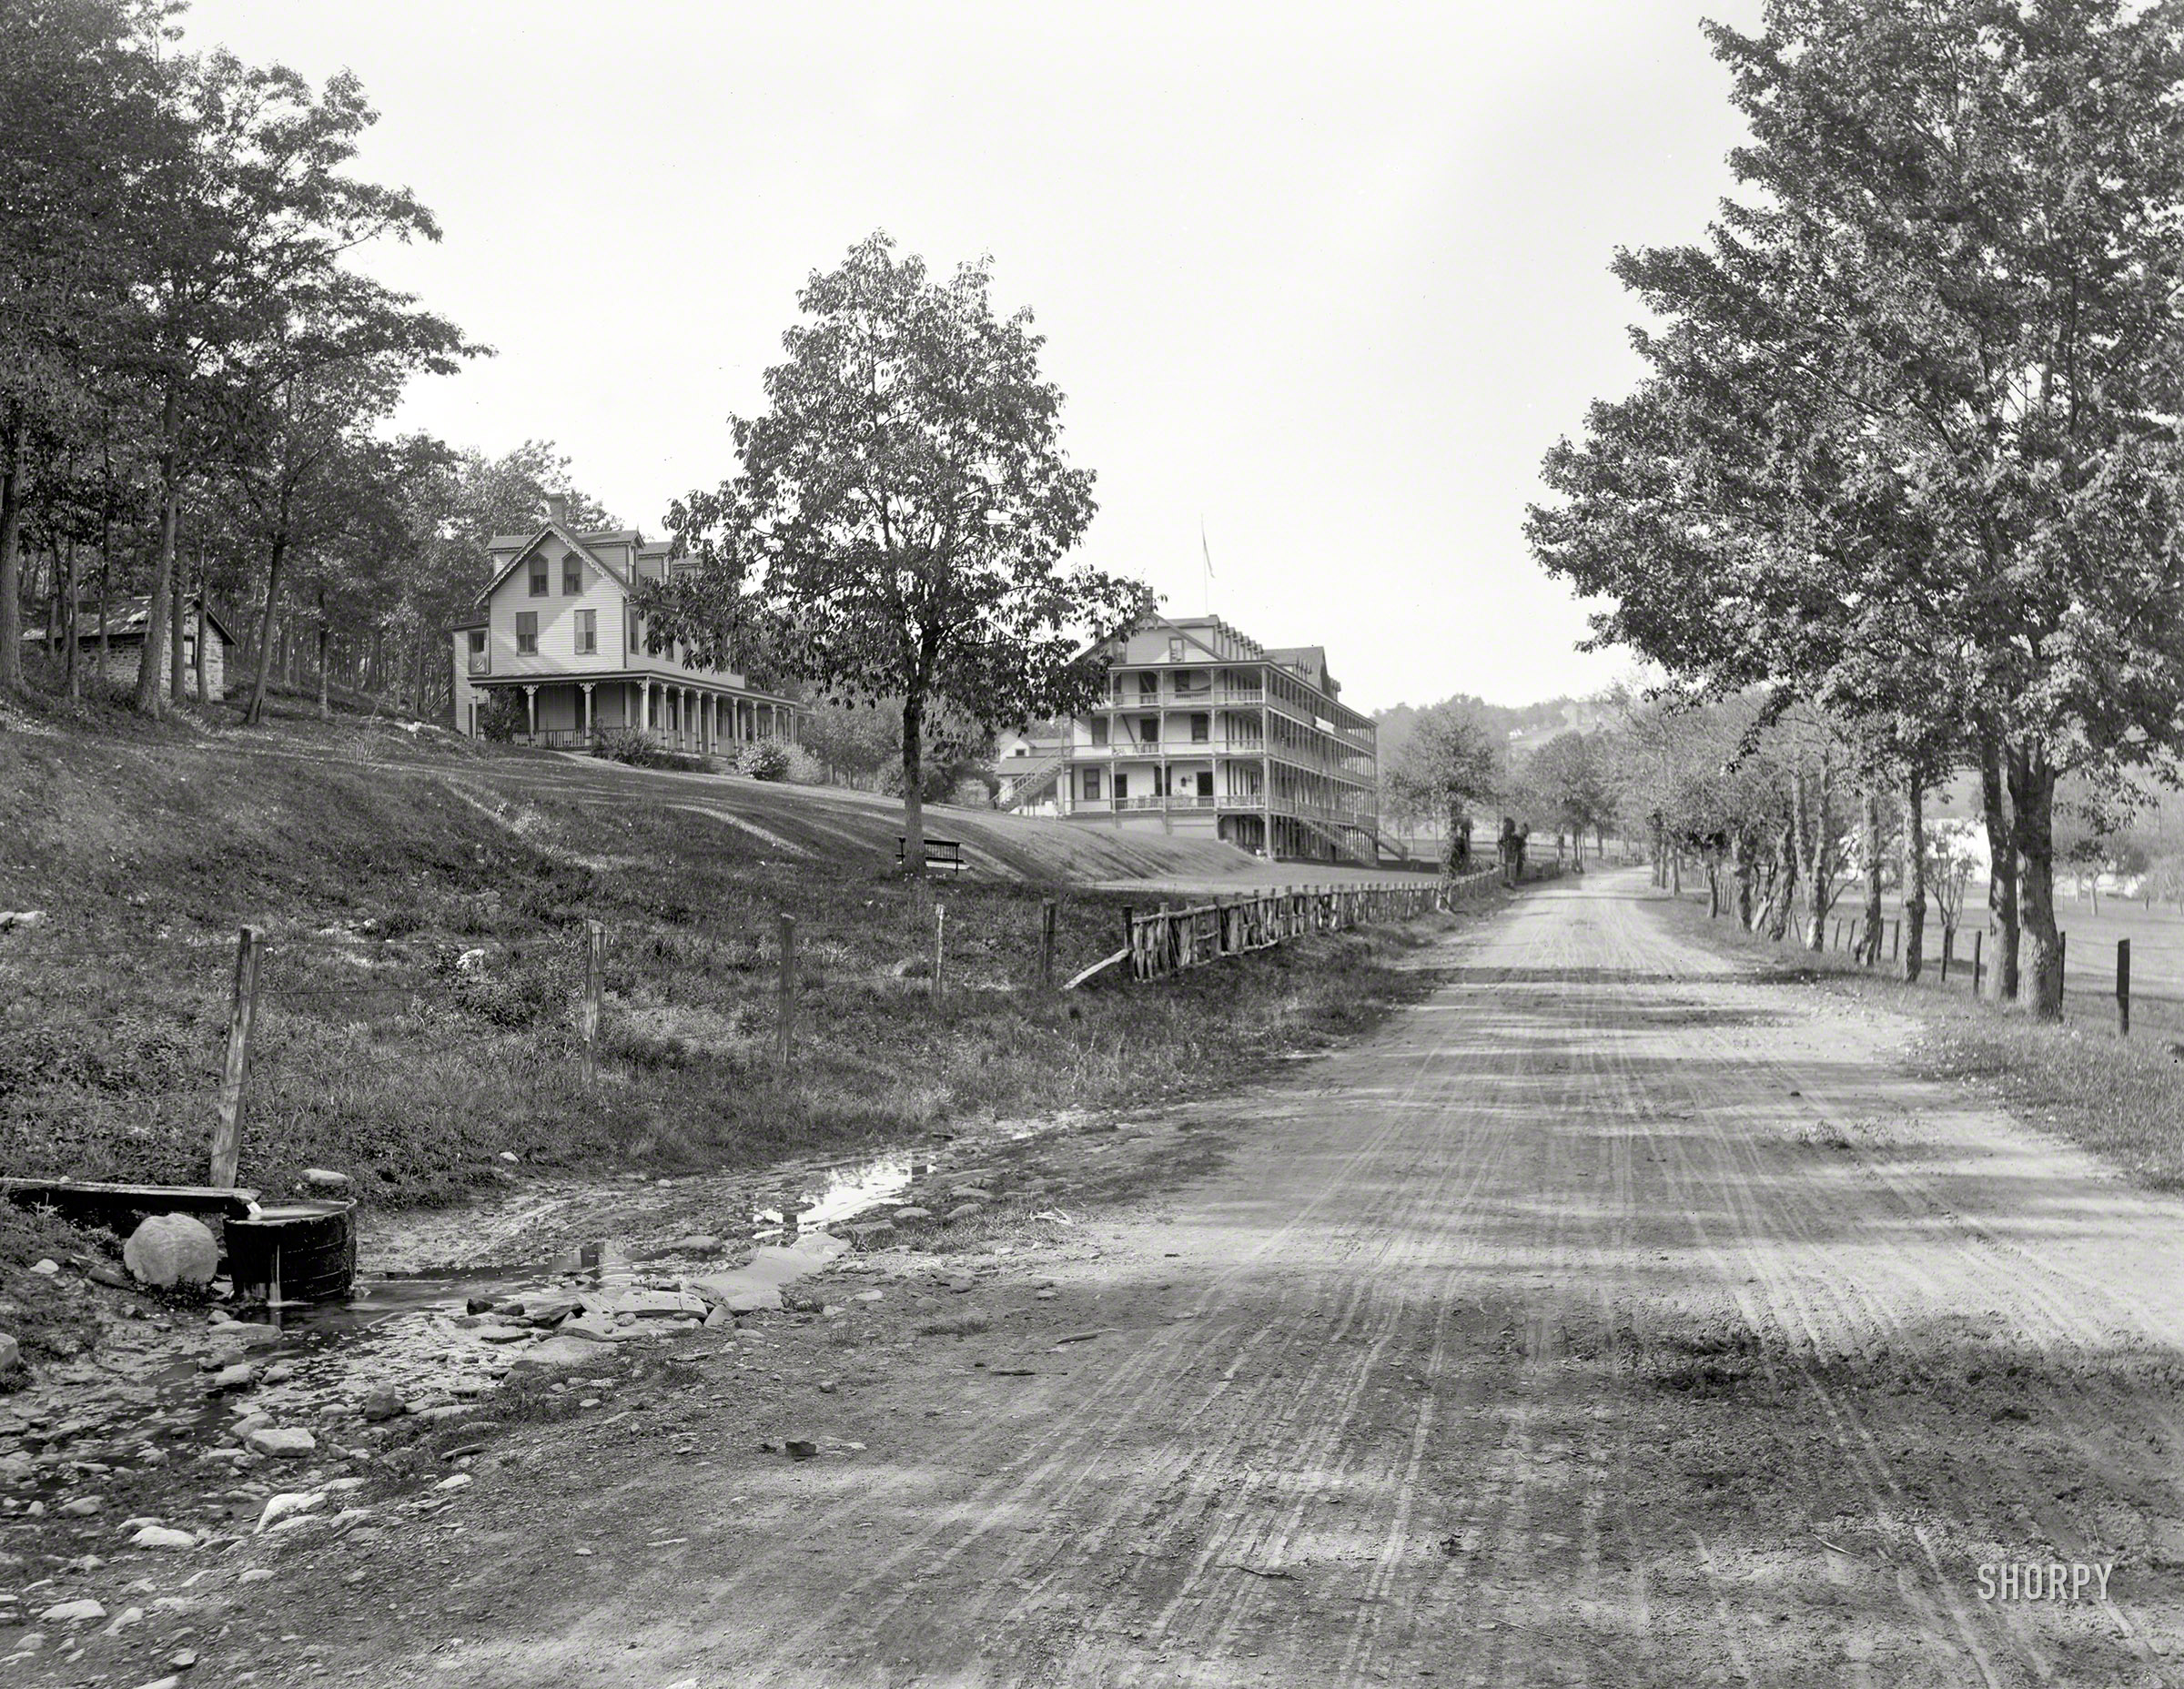 Mount Pocono, Pennsylvania, circa 1901. "Pocono Mountain House and Springs," a popular summer resort at the turn of the century.  8x10 inch dry plate glass negative, Detroit Photographic Company. View full size.